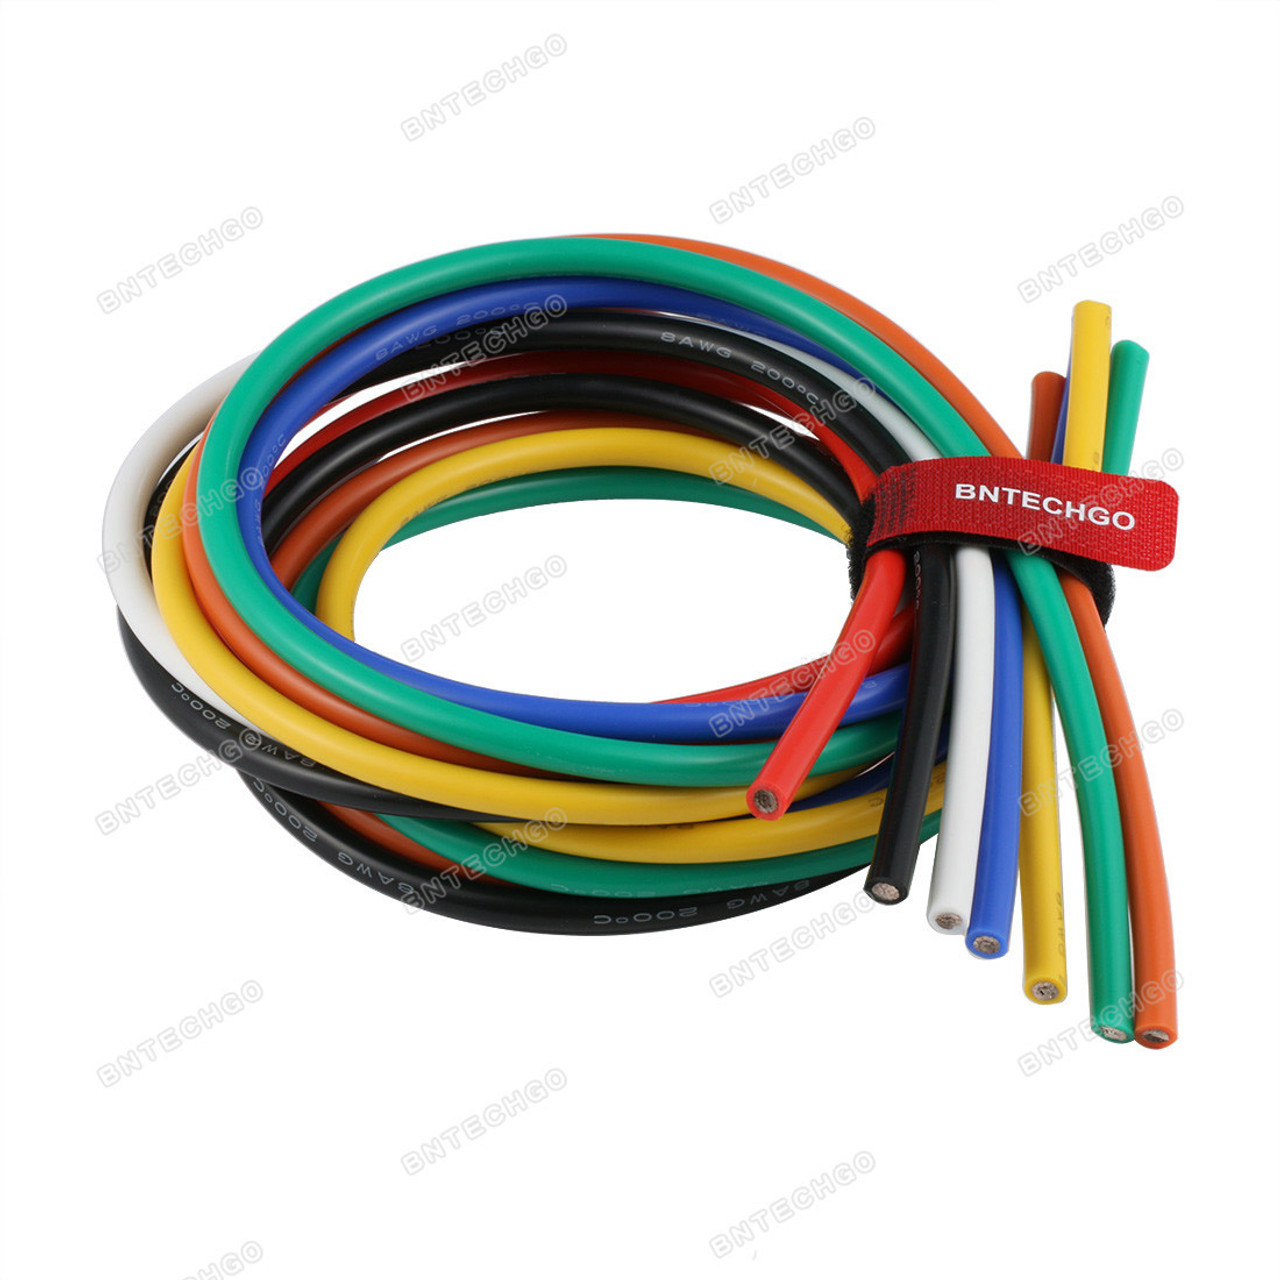  24 Awg Solid Wire Kit Electrical Wire Cable 7colors